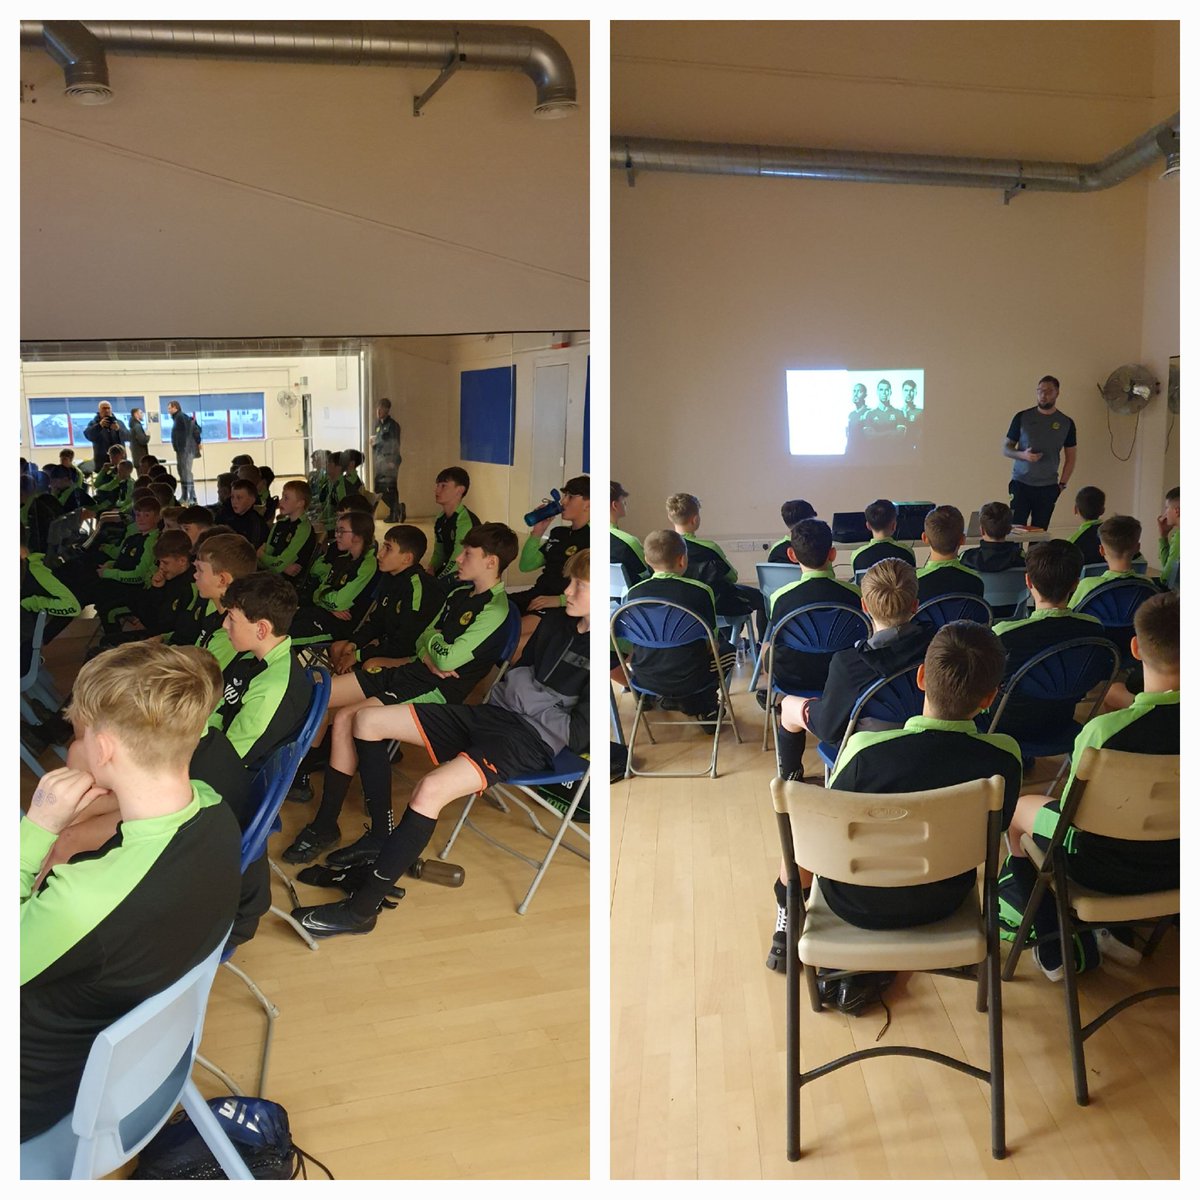 Our @CfonTownAcademy education programme continued last night with our U12'S & U13'S focusing on Respect and Integrity. #development @BwynIachcymru